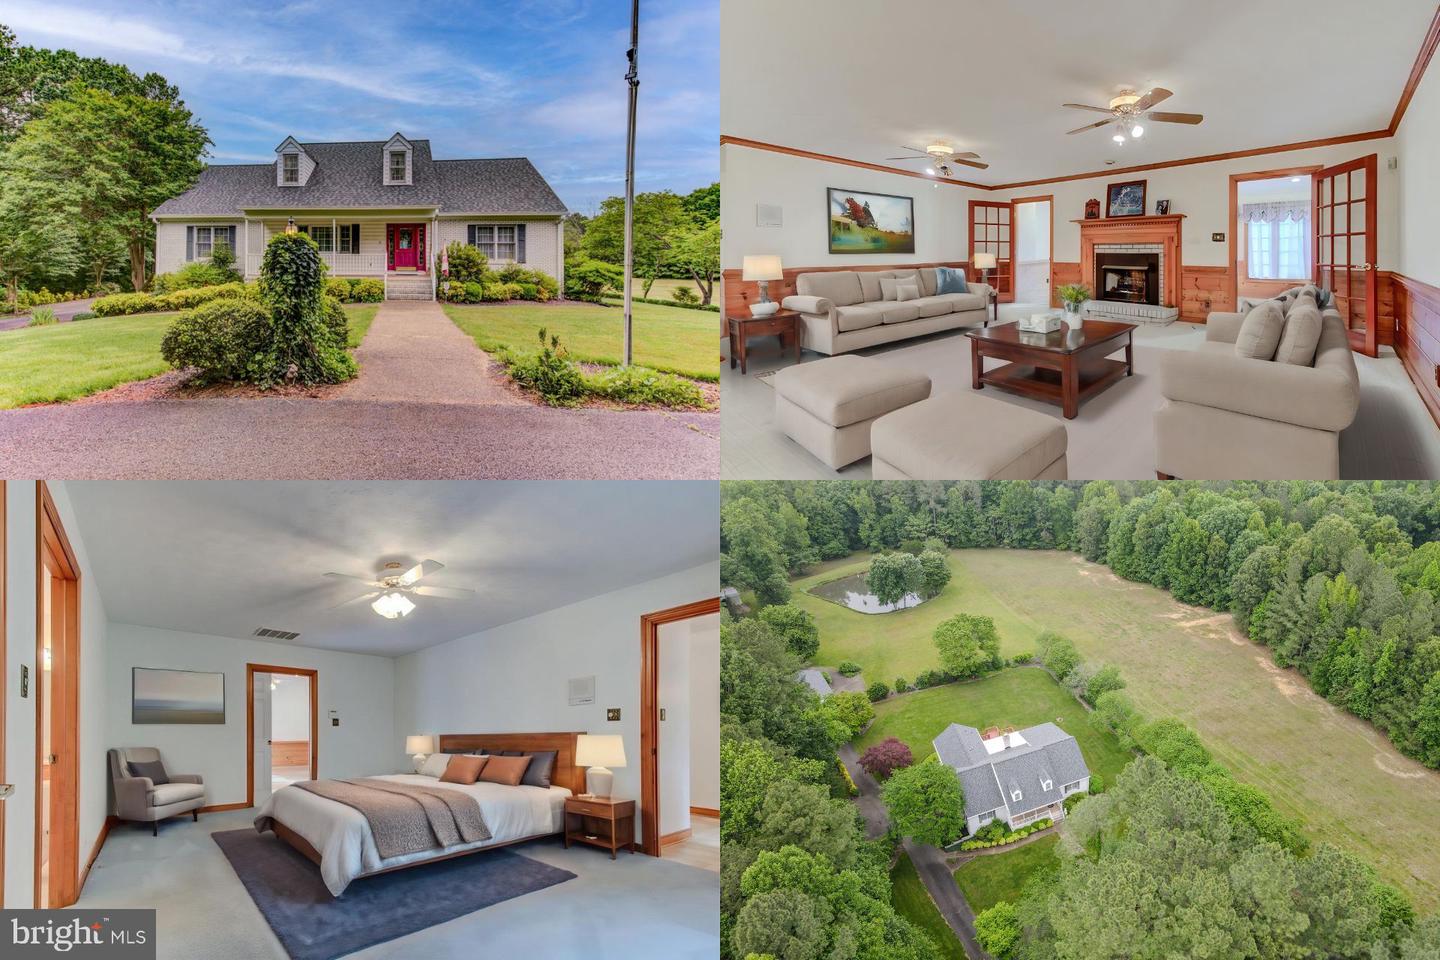 24340 PEAR ORCHARD RD, MOSELEY, Virginia 23120, 4 Bedrooms Bedrooms, ,3 BathroomsBathrooms,Residential,For sale,24340 PEAR ORCHARD RD,VACF2000778 MLS # VACF2000778